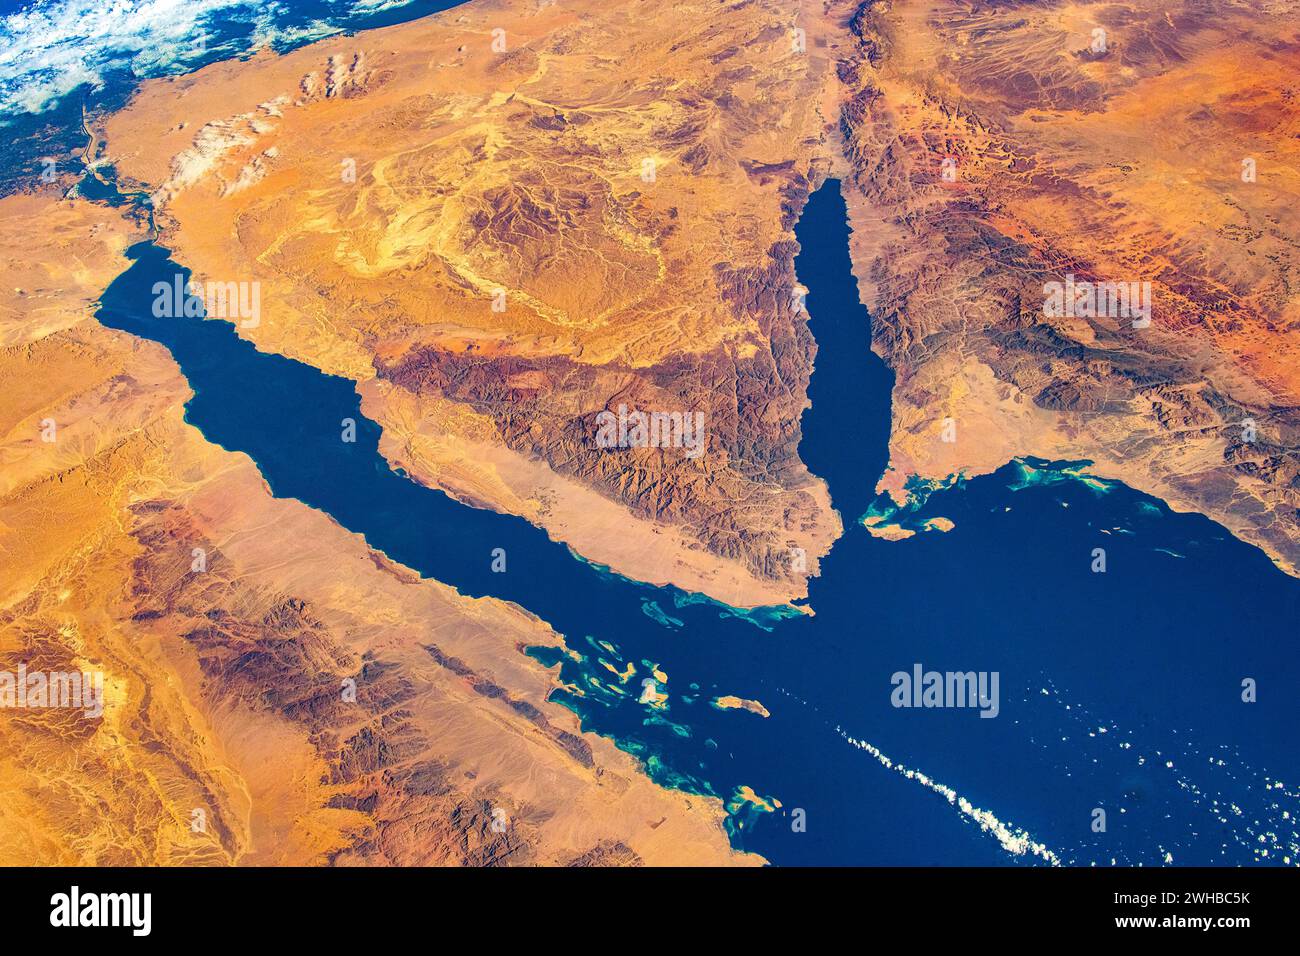 Red Sea, Gulf of Suez, Middle East Stock Photo